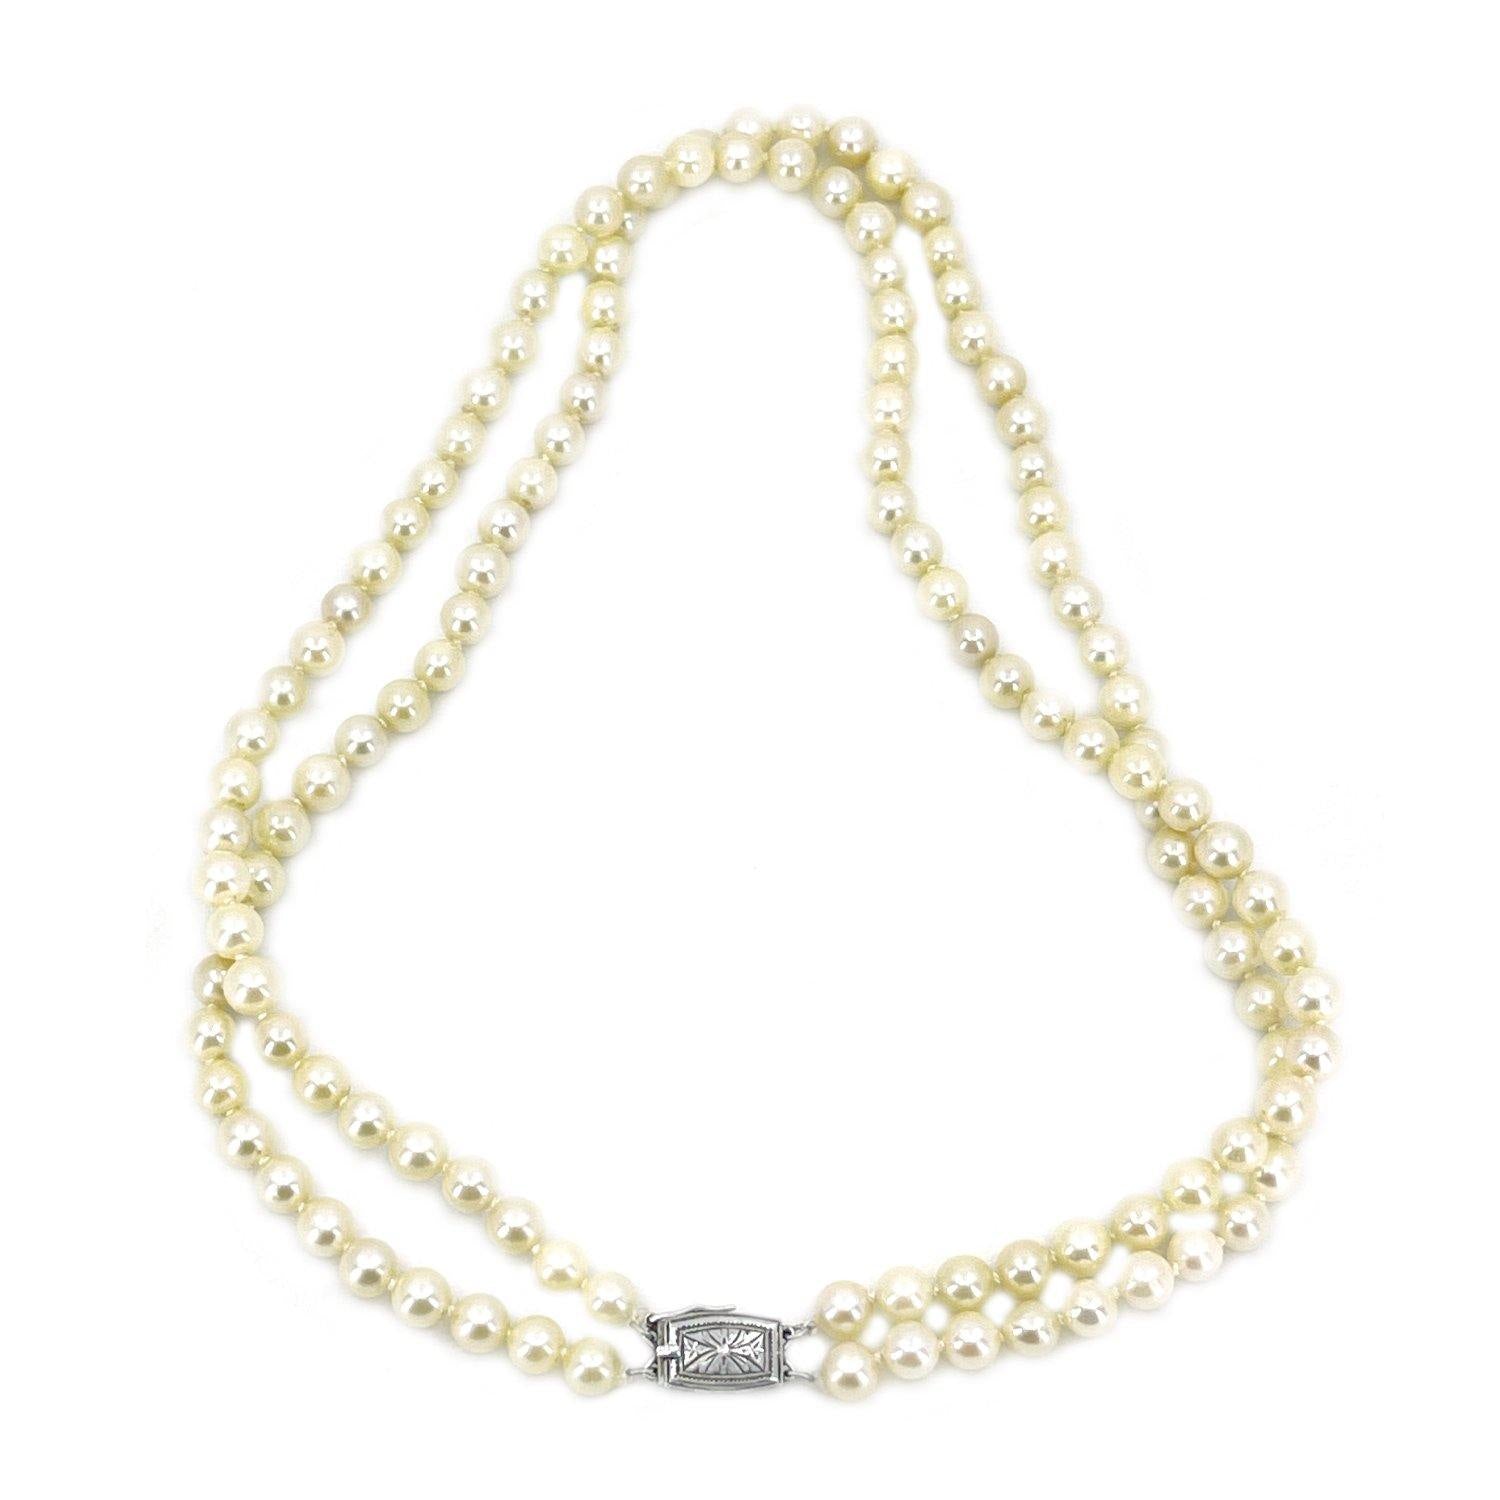 Double Strand Engraved Japanese Cultured Akoya Pearl Choker Necklace -Sterling Silver 15.50 & 16 Inch